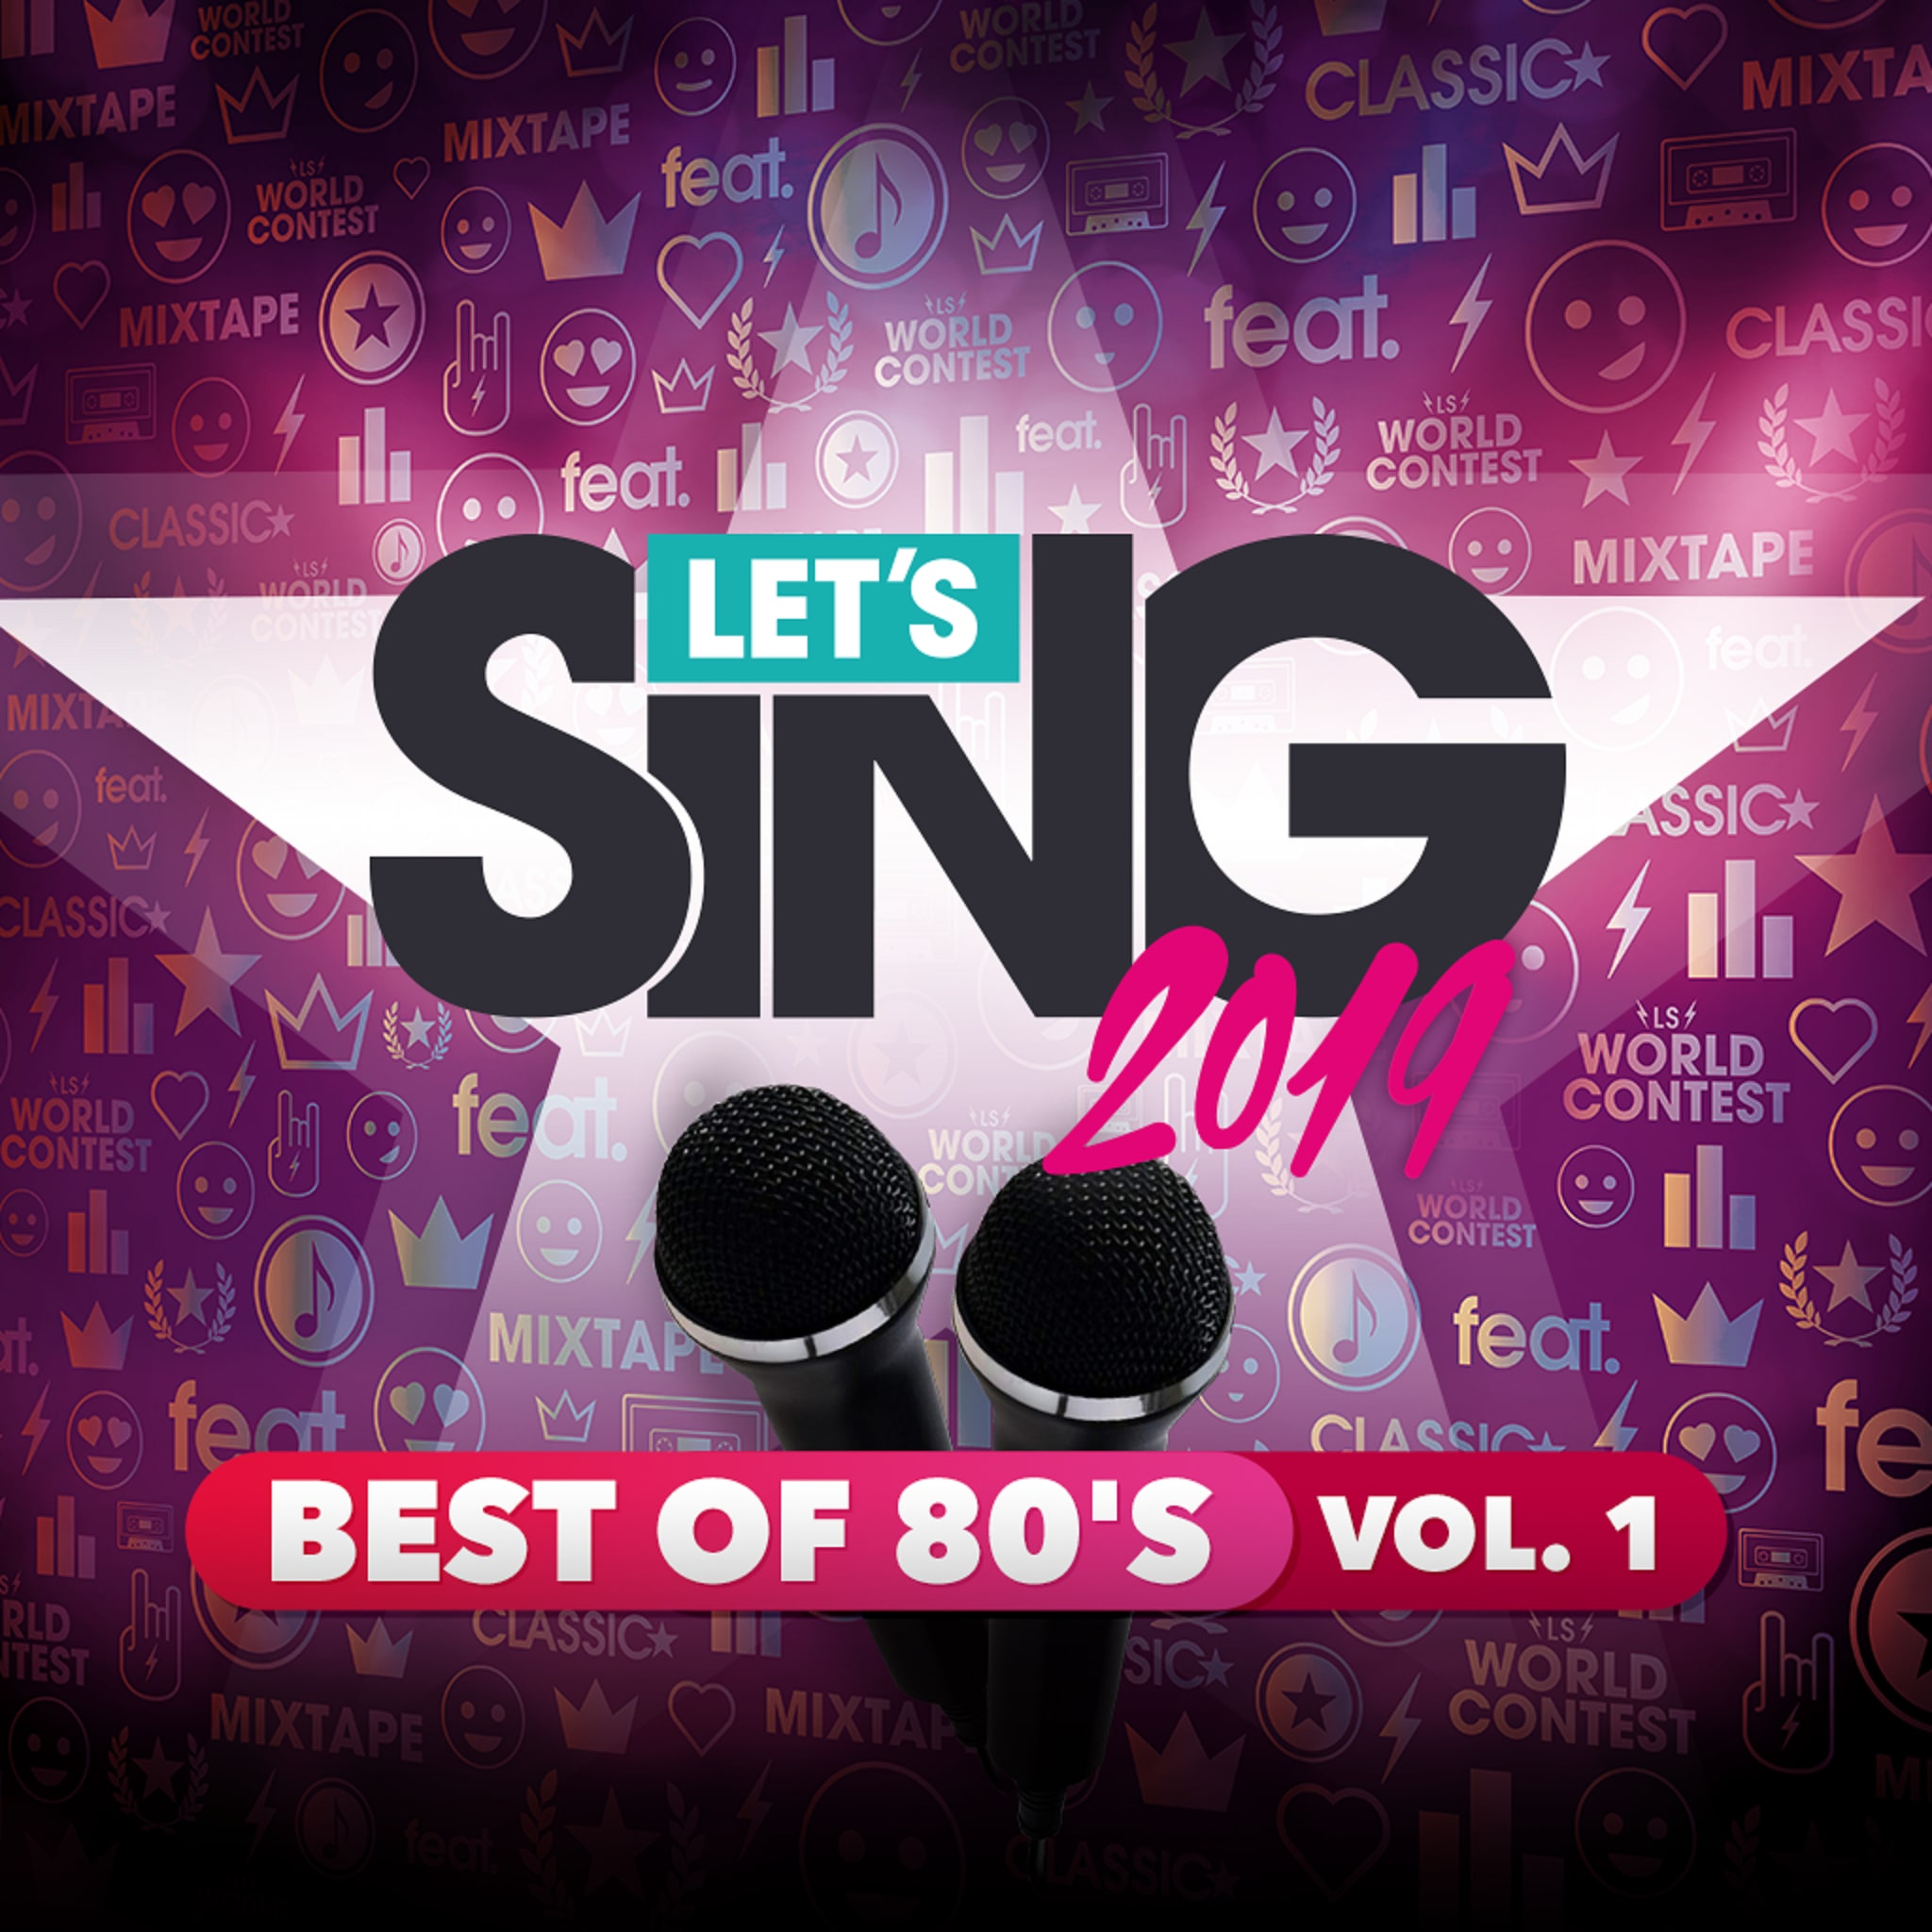 Let's Sing 2019 - Best of 80's Vol. 1 Song Pack